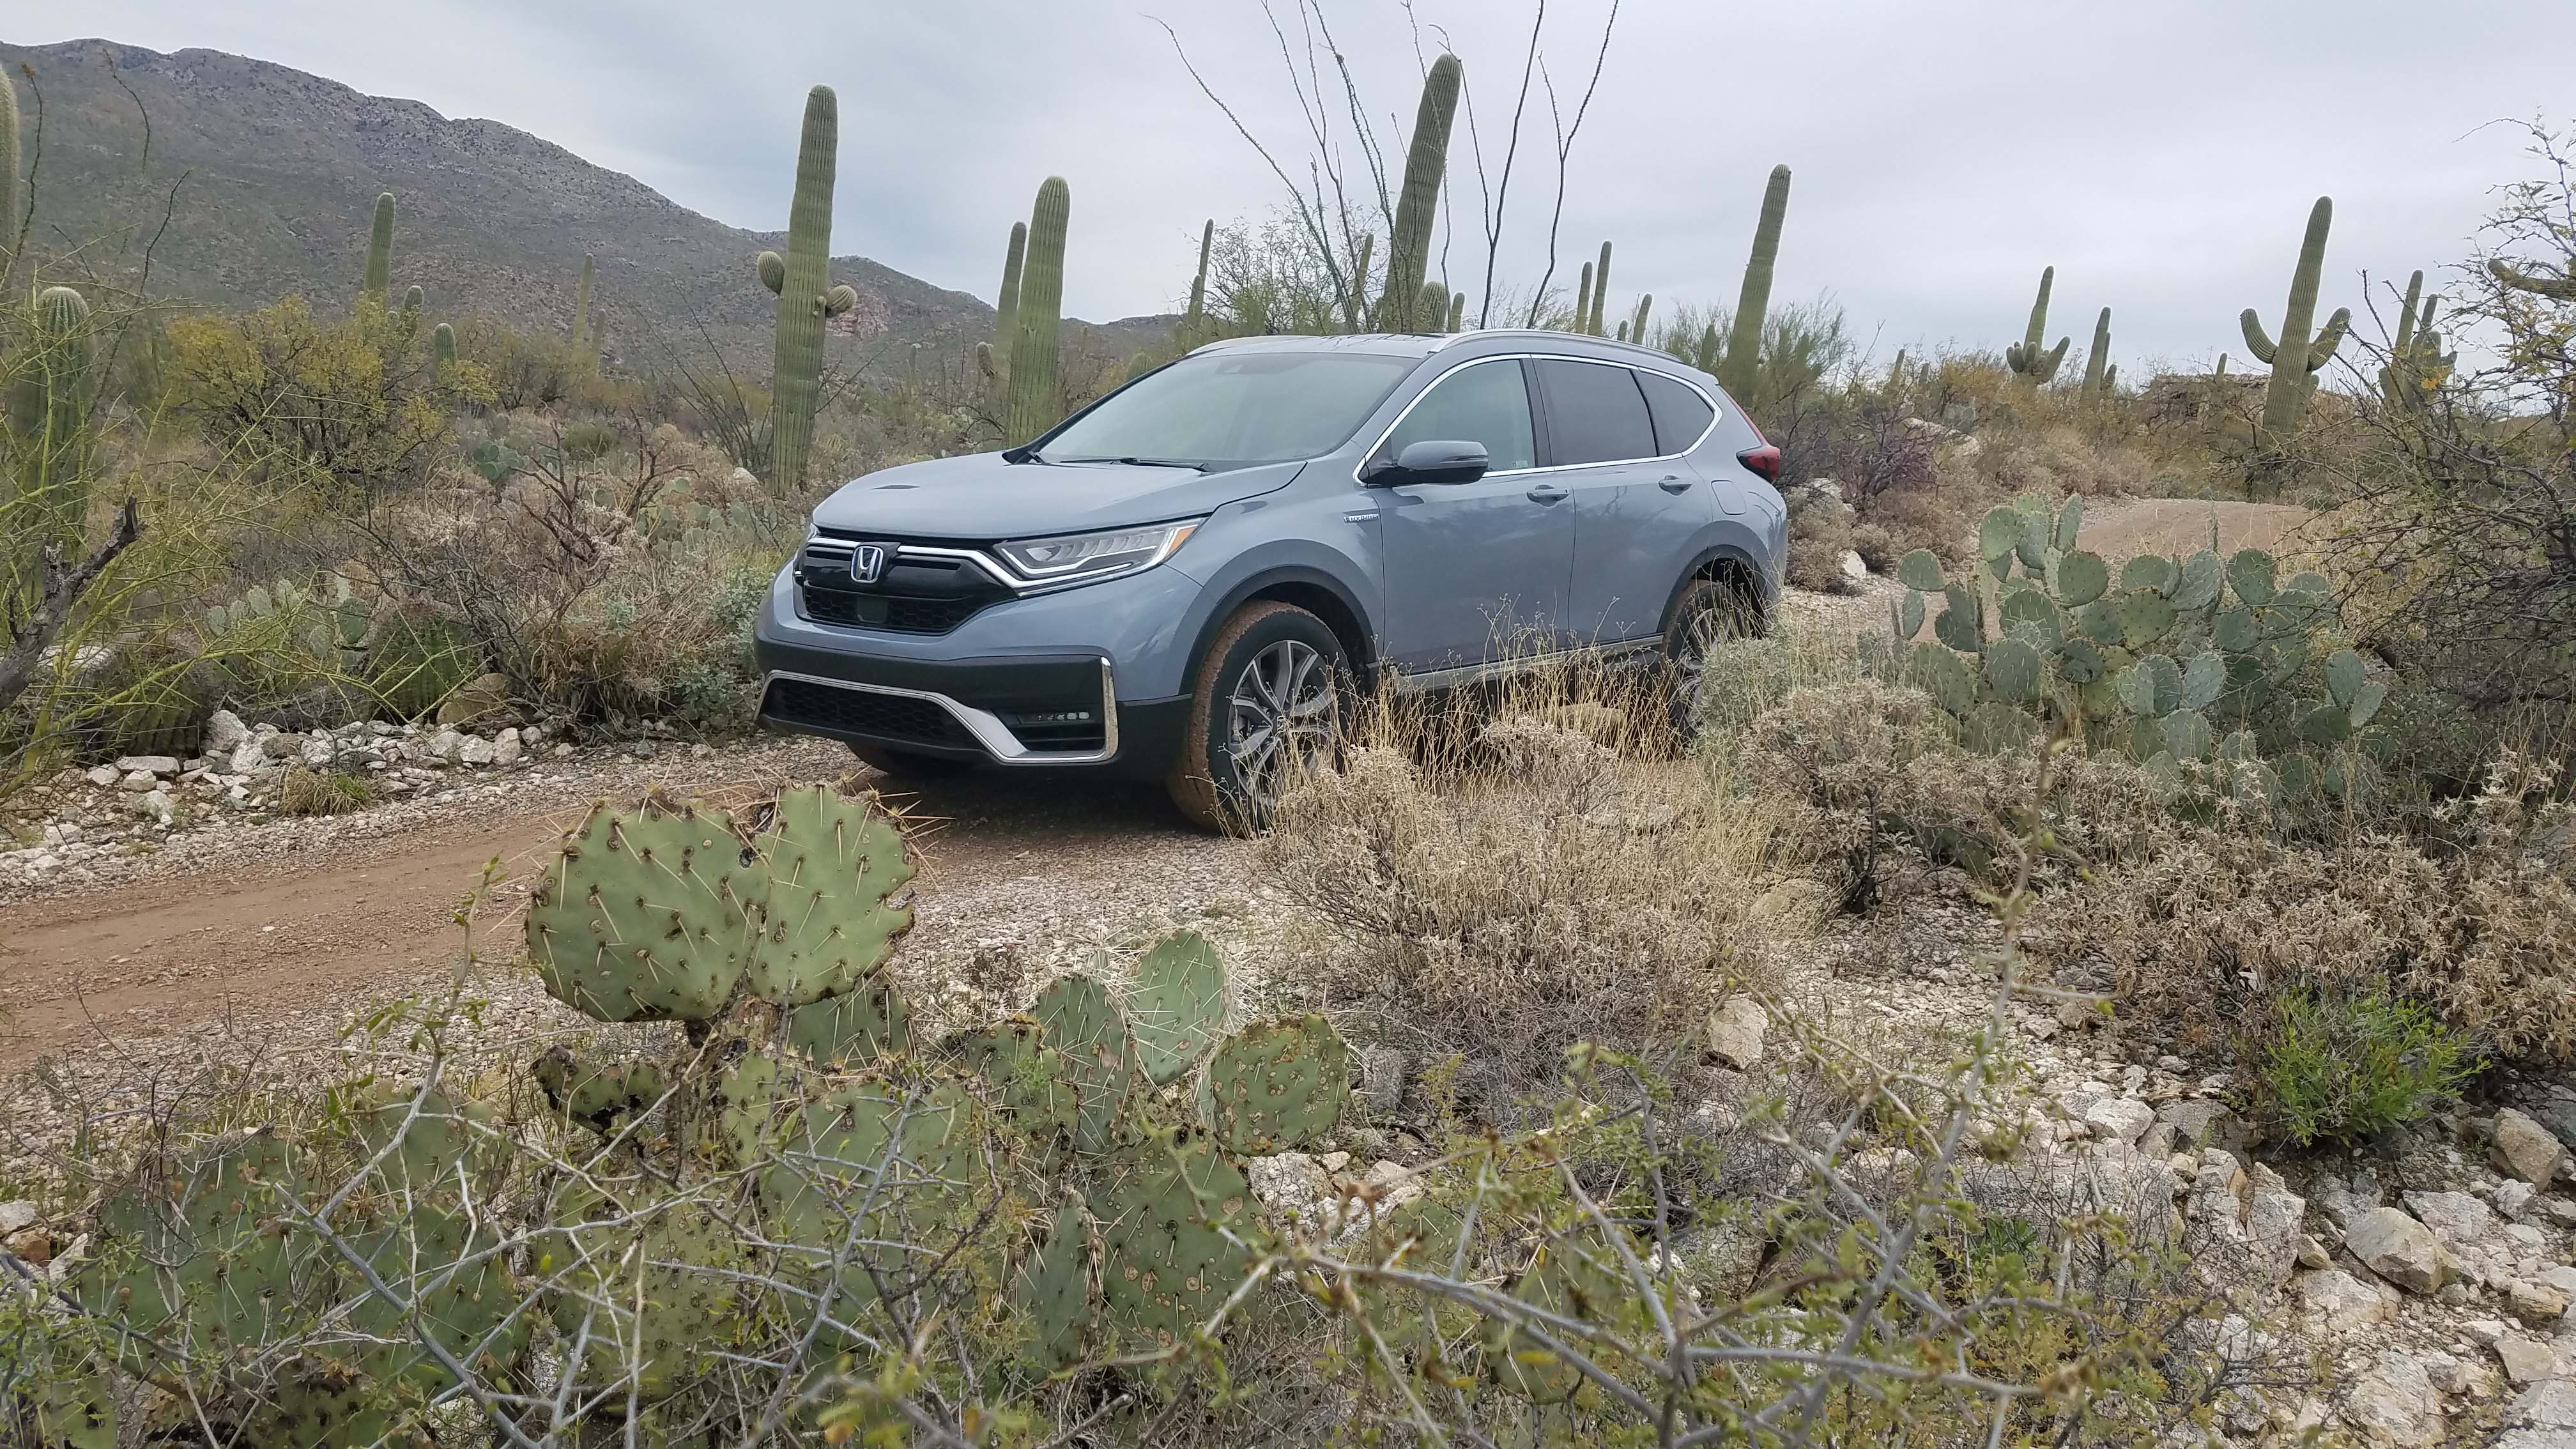 The 2020 Honda CR-V Hybrid gets 40 mpg in the city — but its standard AWD and 35 mpg highway allows for rural adventures, too.